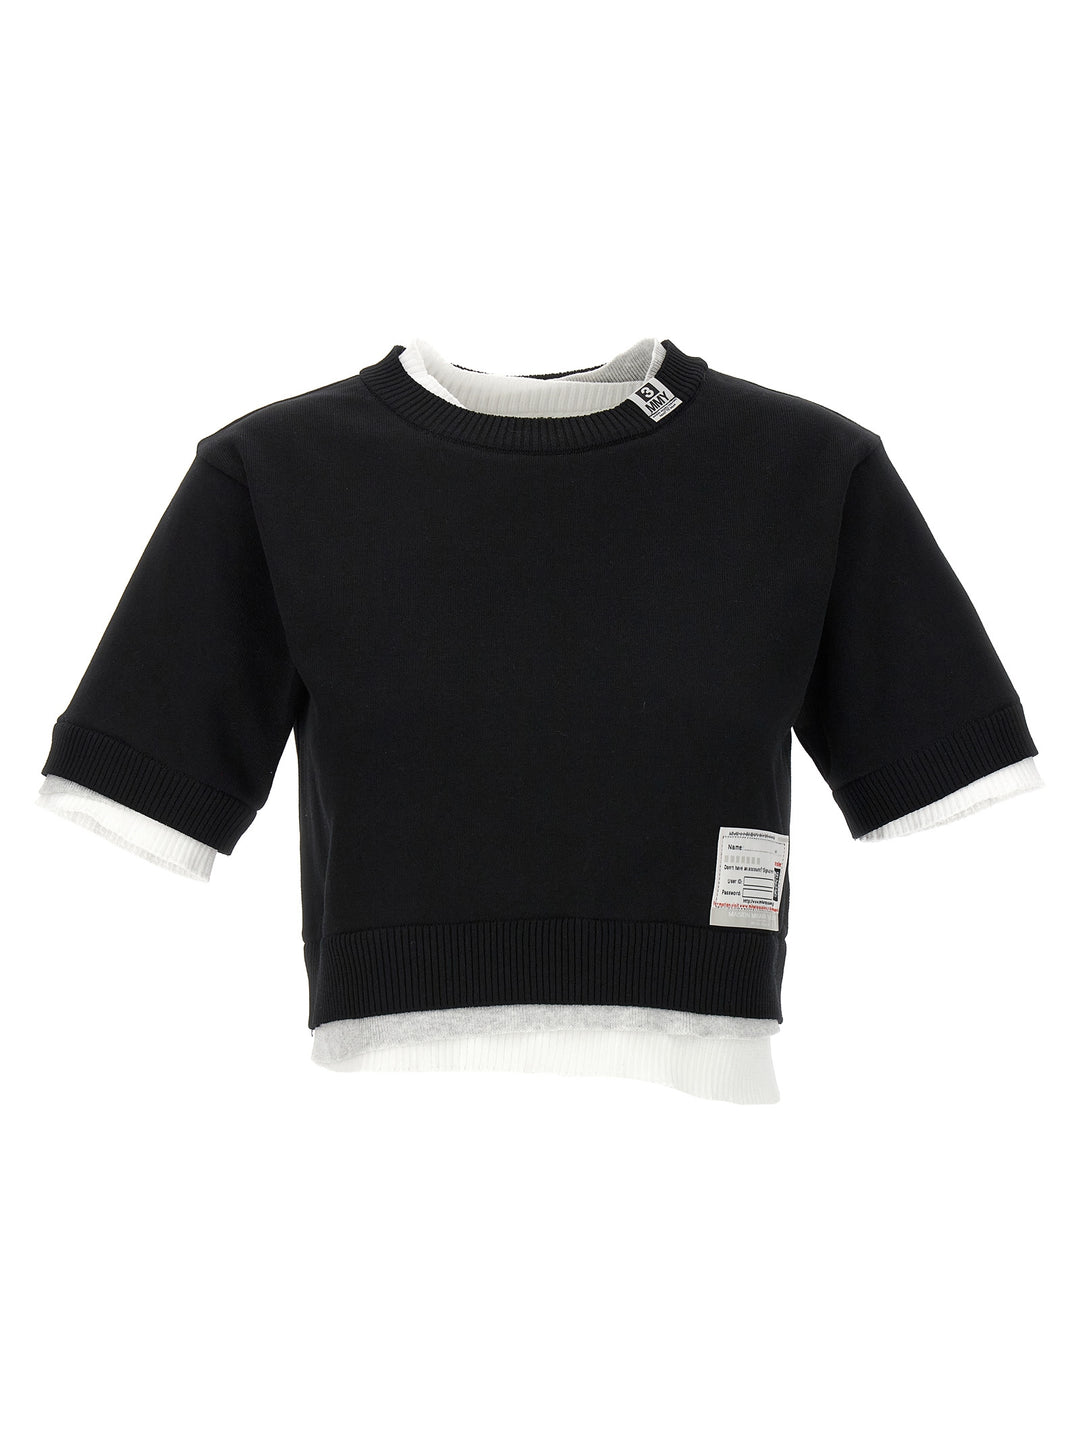 Cropped Sweater With Contrasting Inserts Maglioni Bianco/Nero